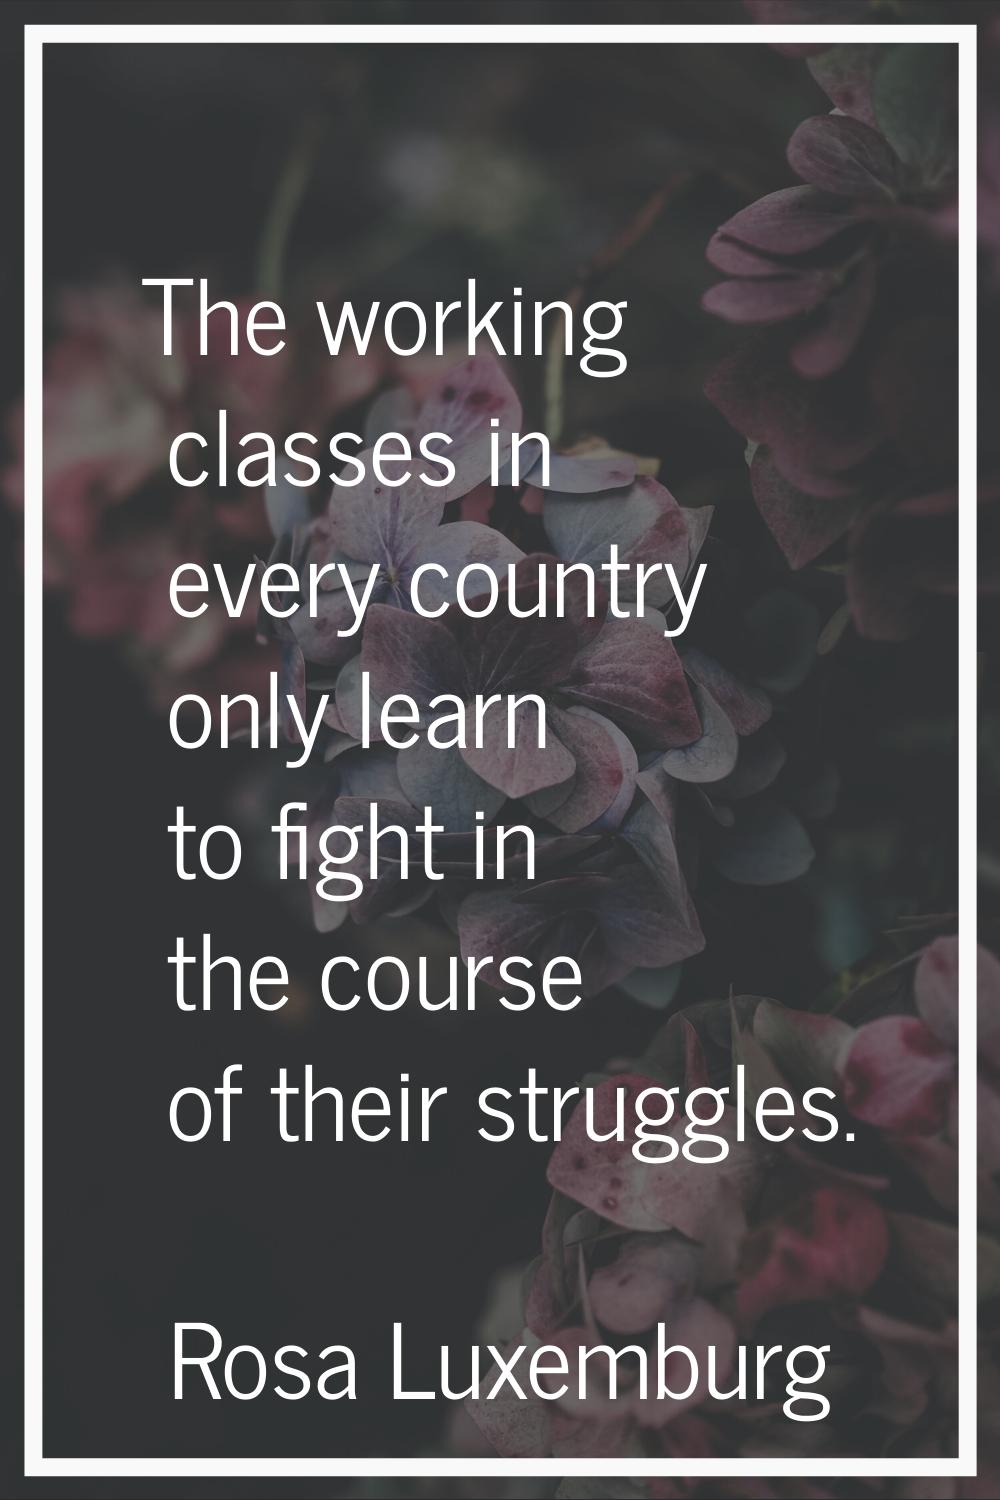 The working classes in every country only learn to fight in the course of their struggles.